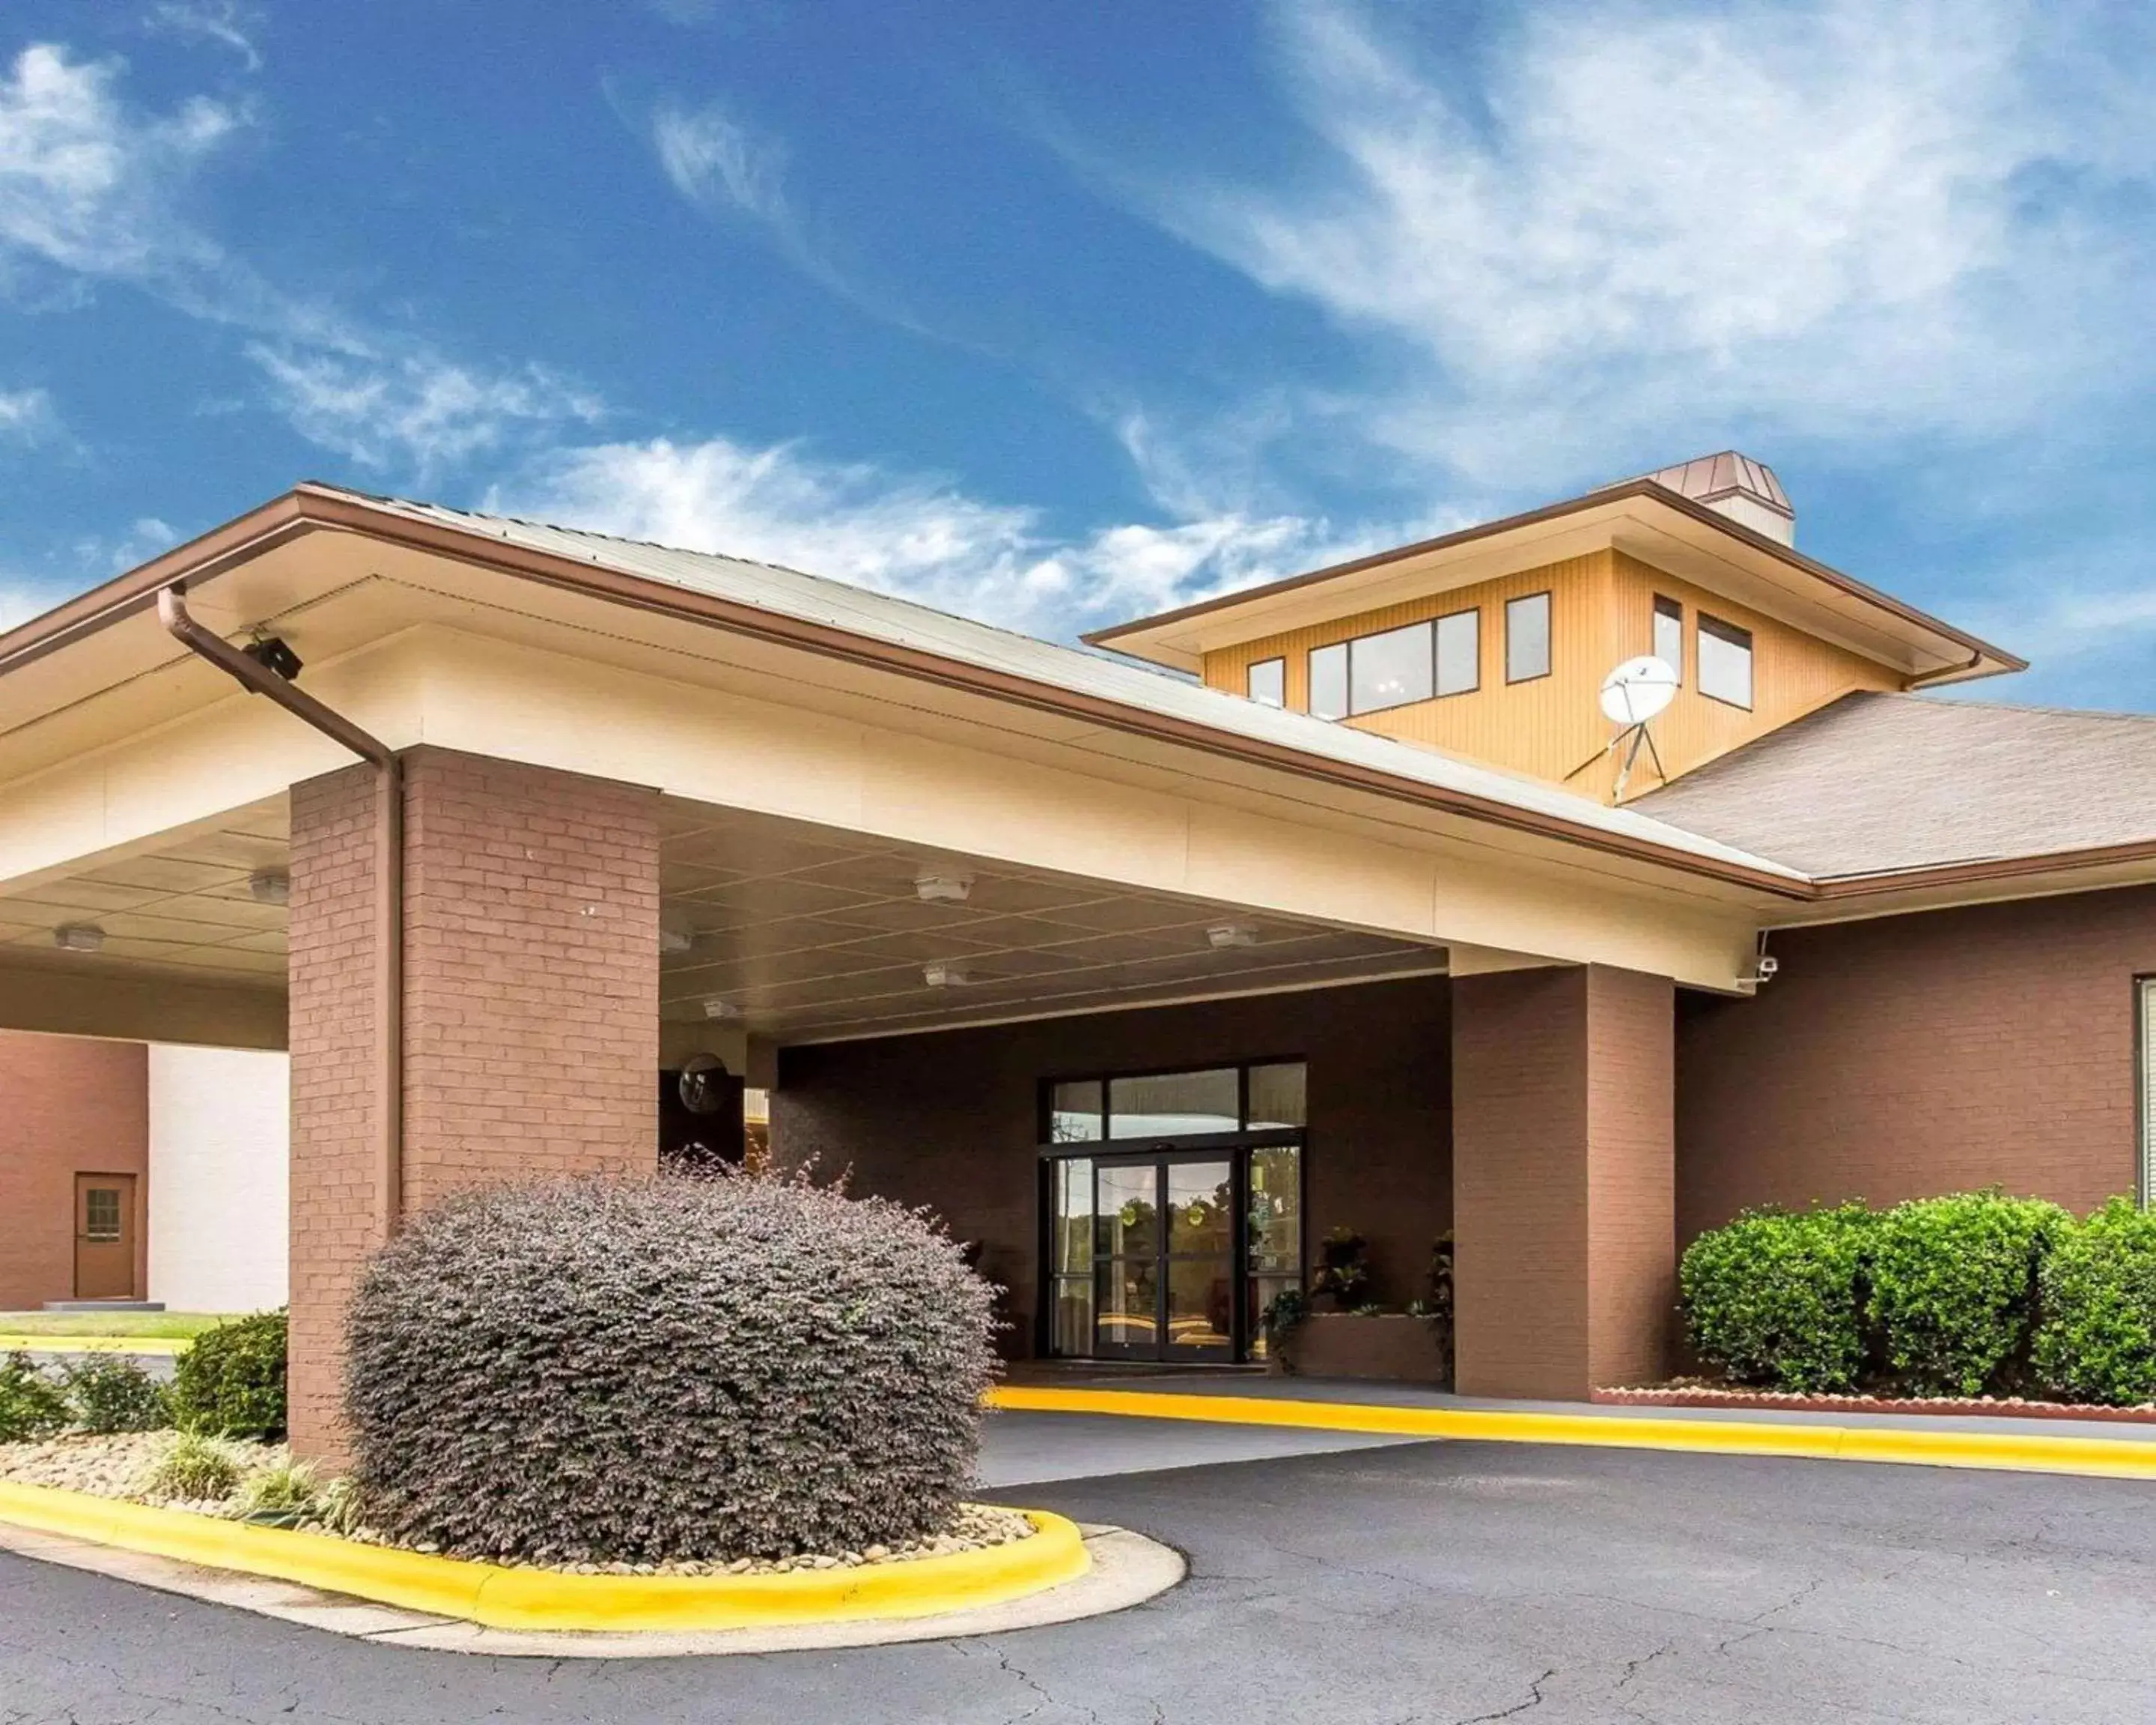 Property Building in Quality Suites Convention Center - Hickory